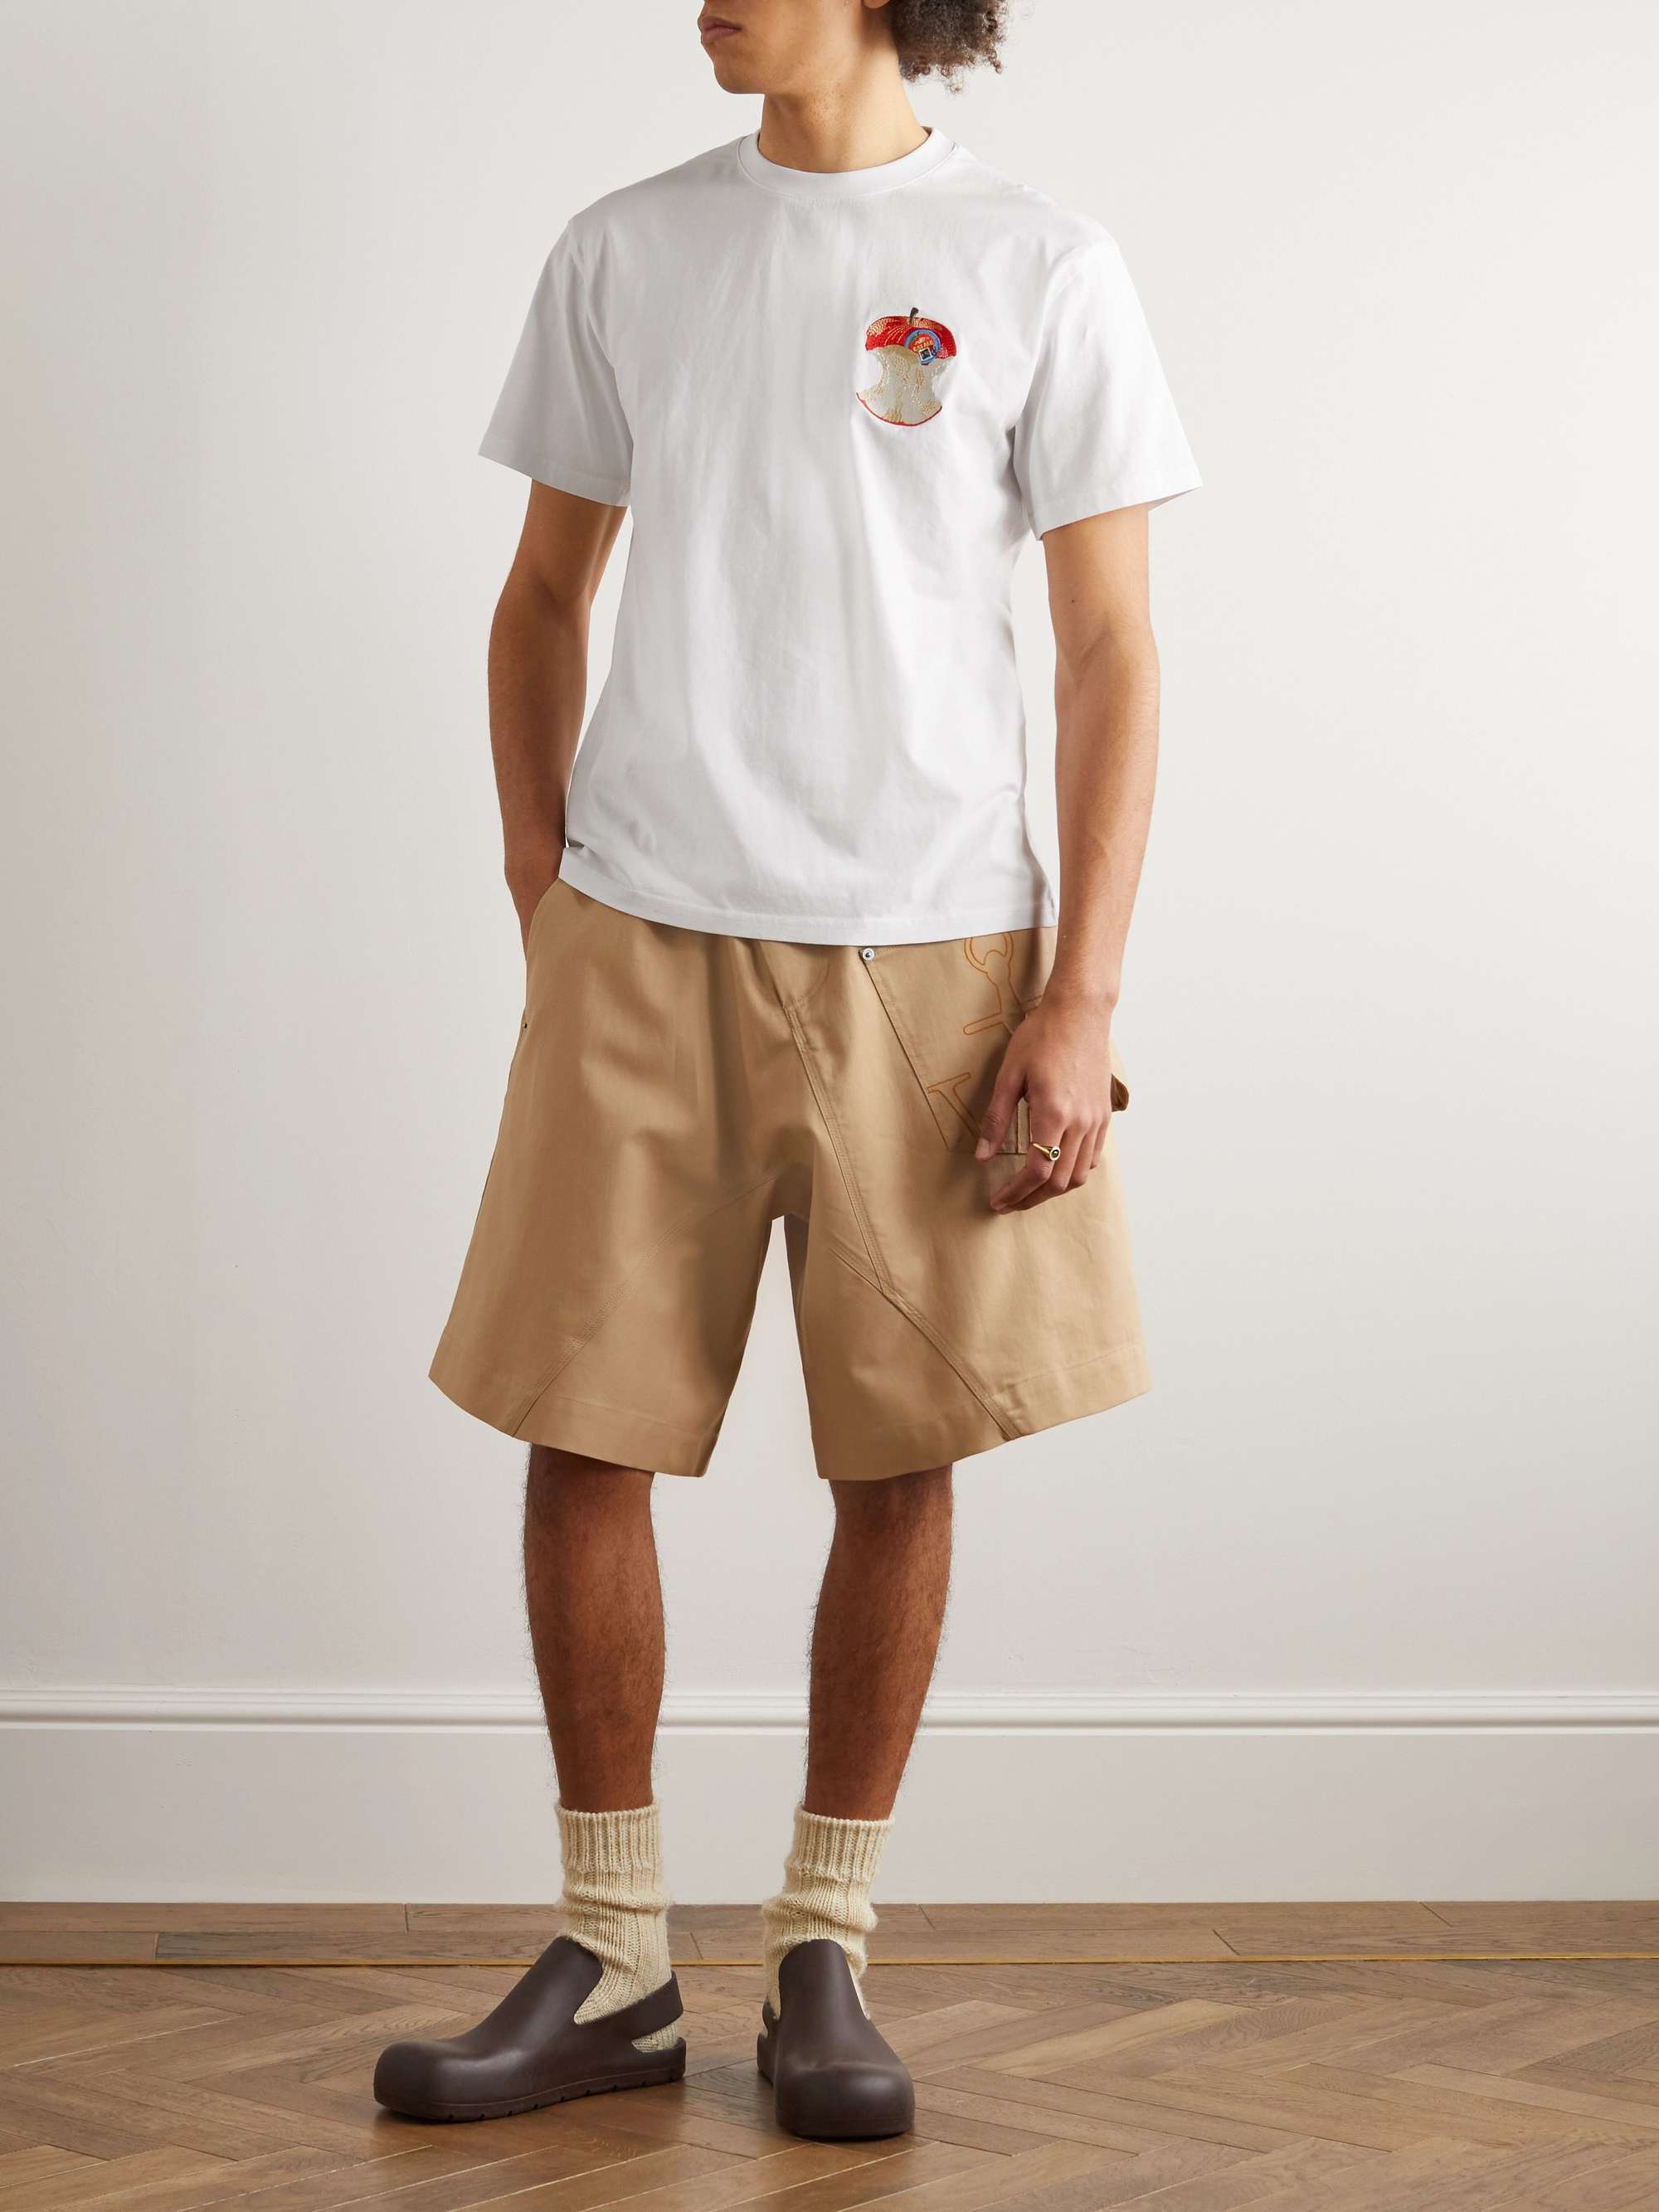 JW ANDERSON Embroidered Cotton-Jersey T-Shirt